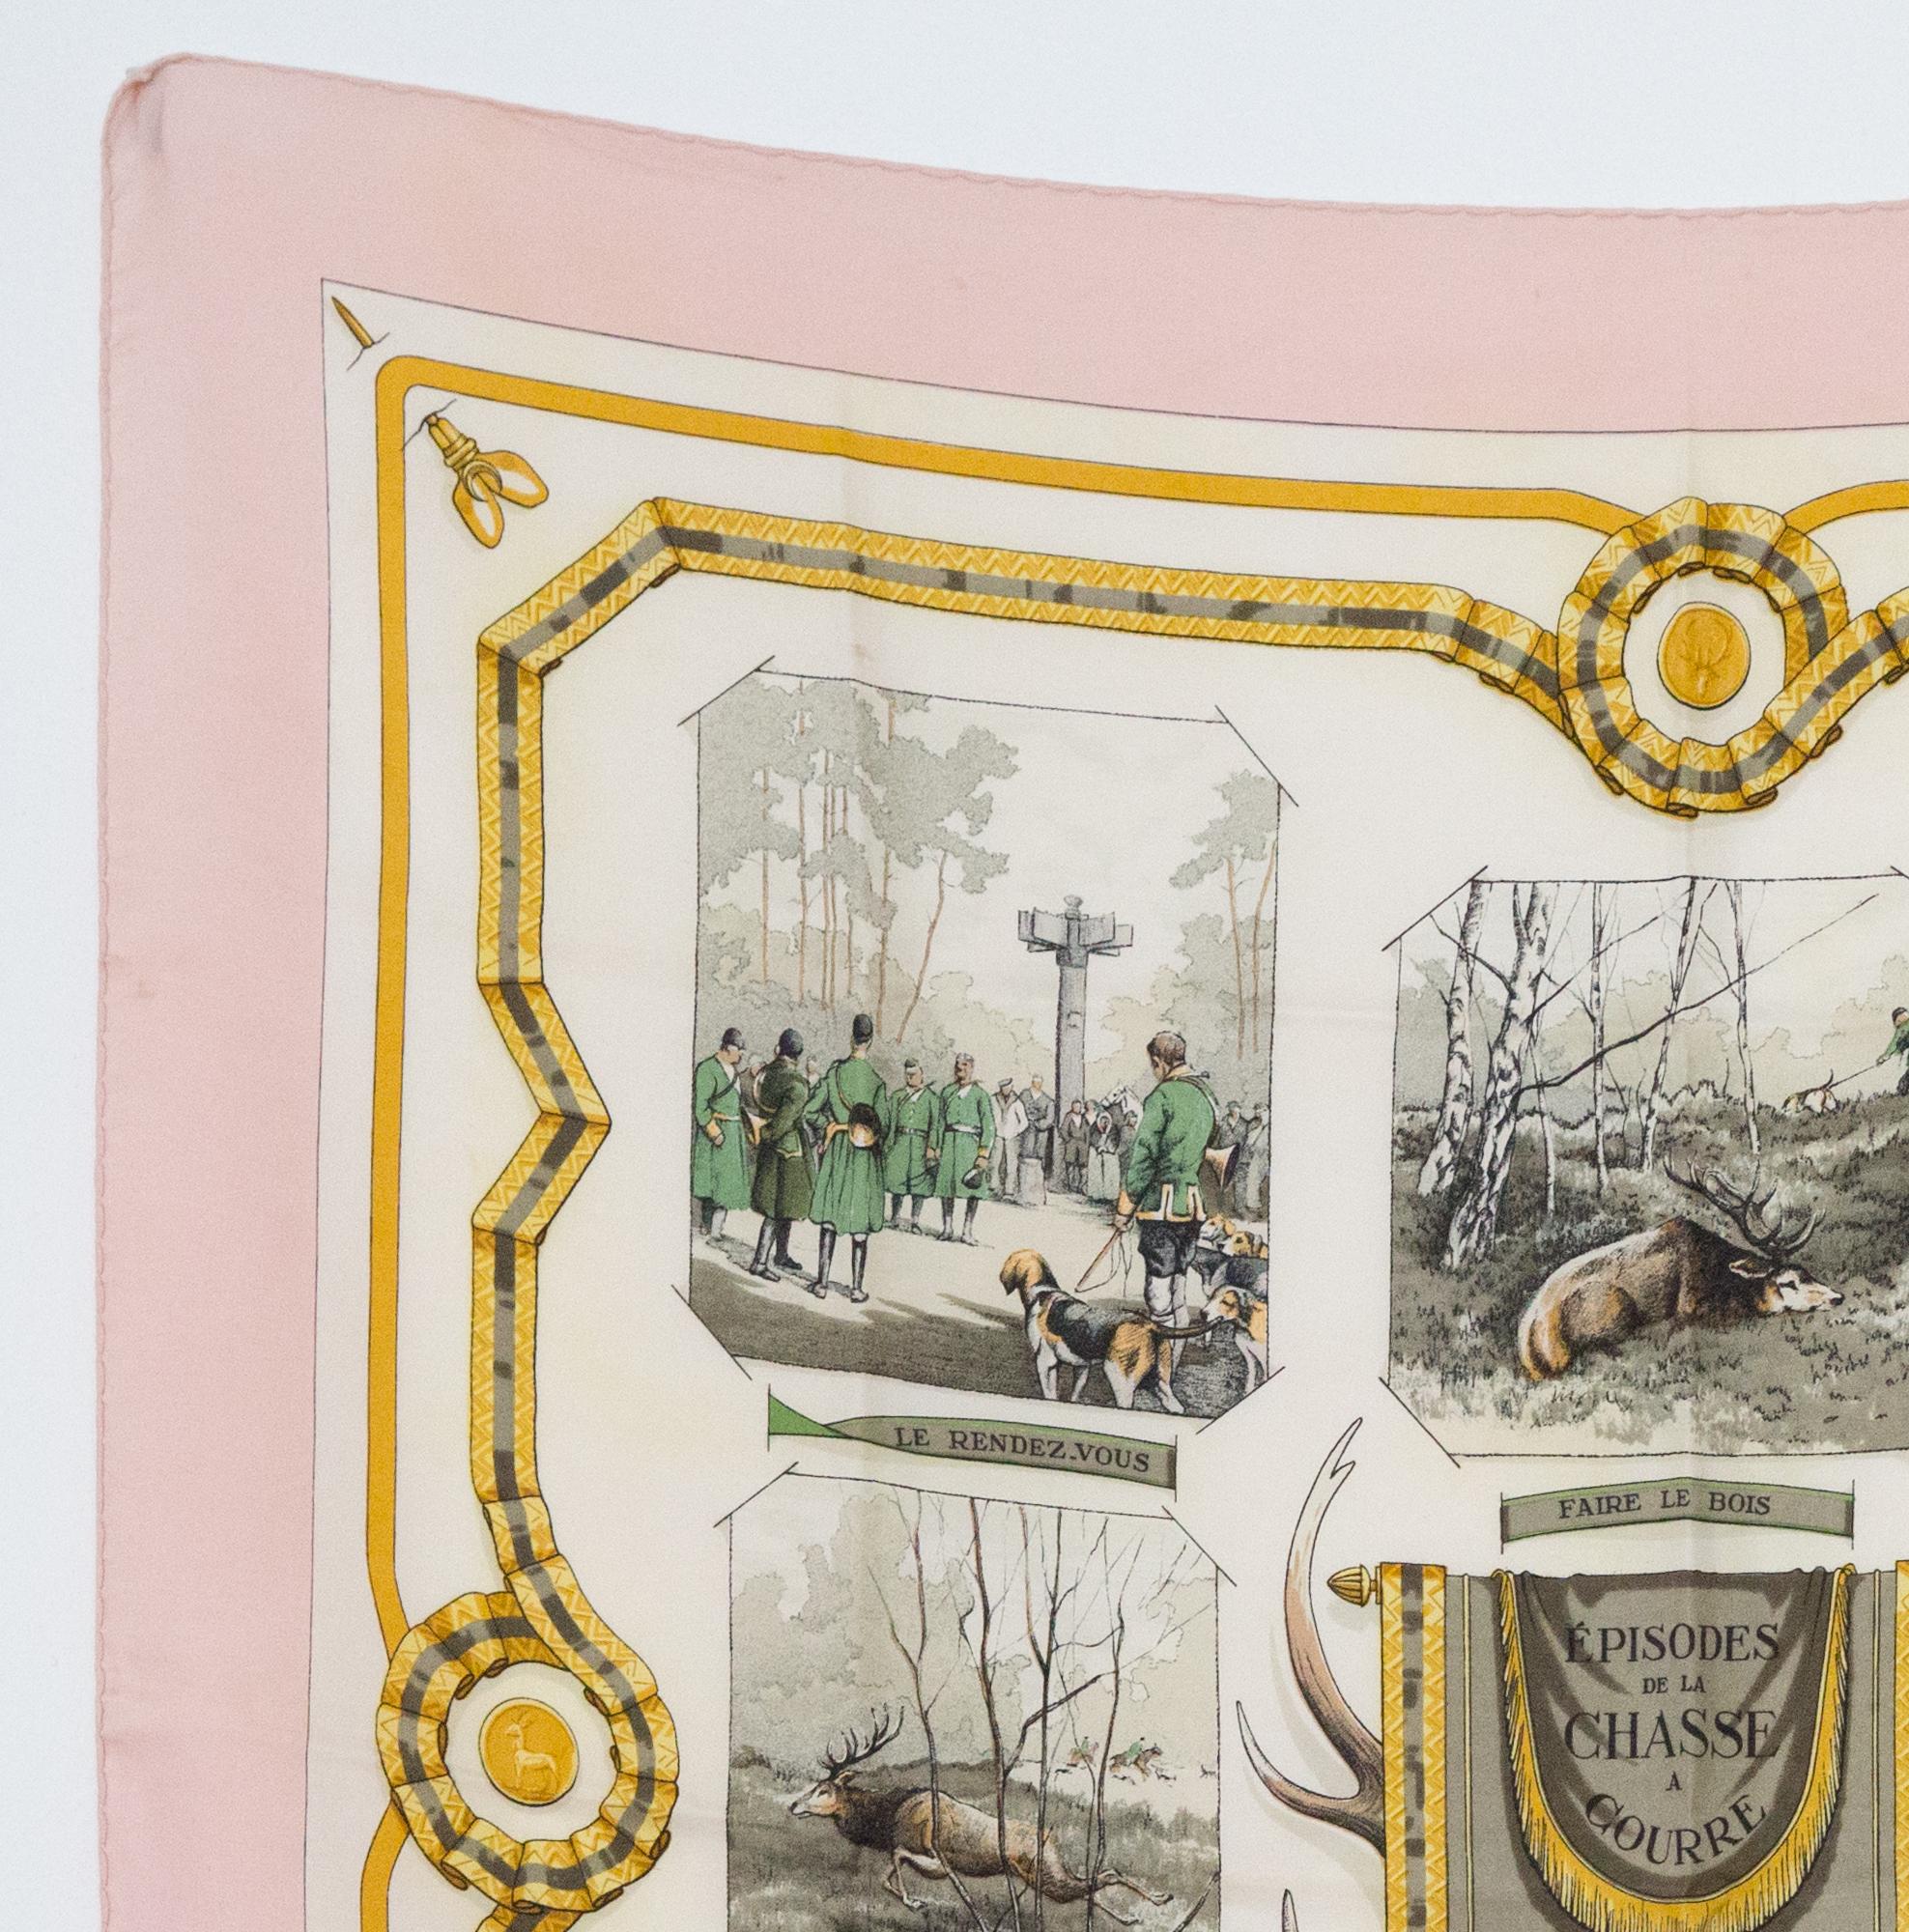 Hermes rare 1960s silk scarf  Episodes de la Chasse a Courre by Jean-Charles Hallo featuring a light pink border, a horse scene.
Only one edition: 1963
In good vintage condition. Made in France.
35,4in. (90cm)  X 35,4in. (90cm)
We guarantee you will